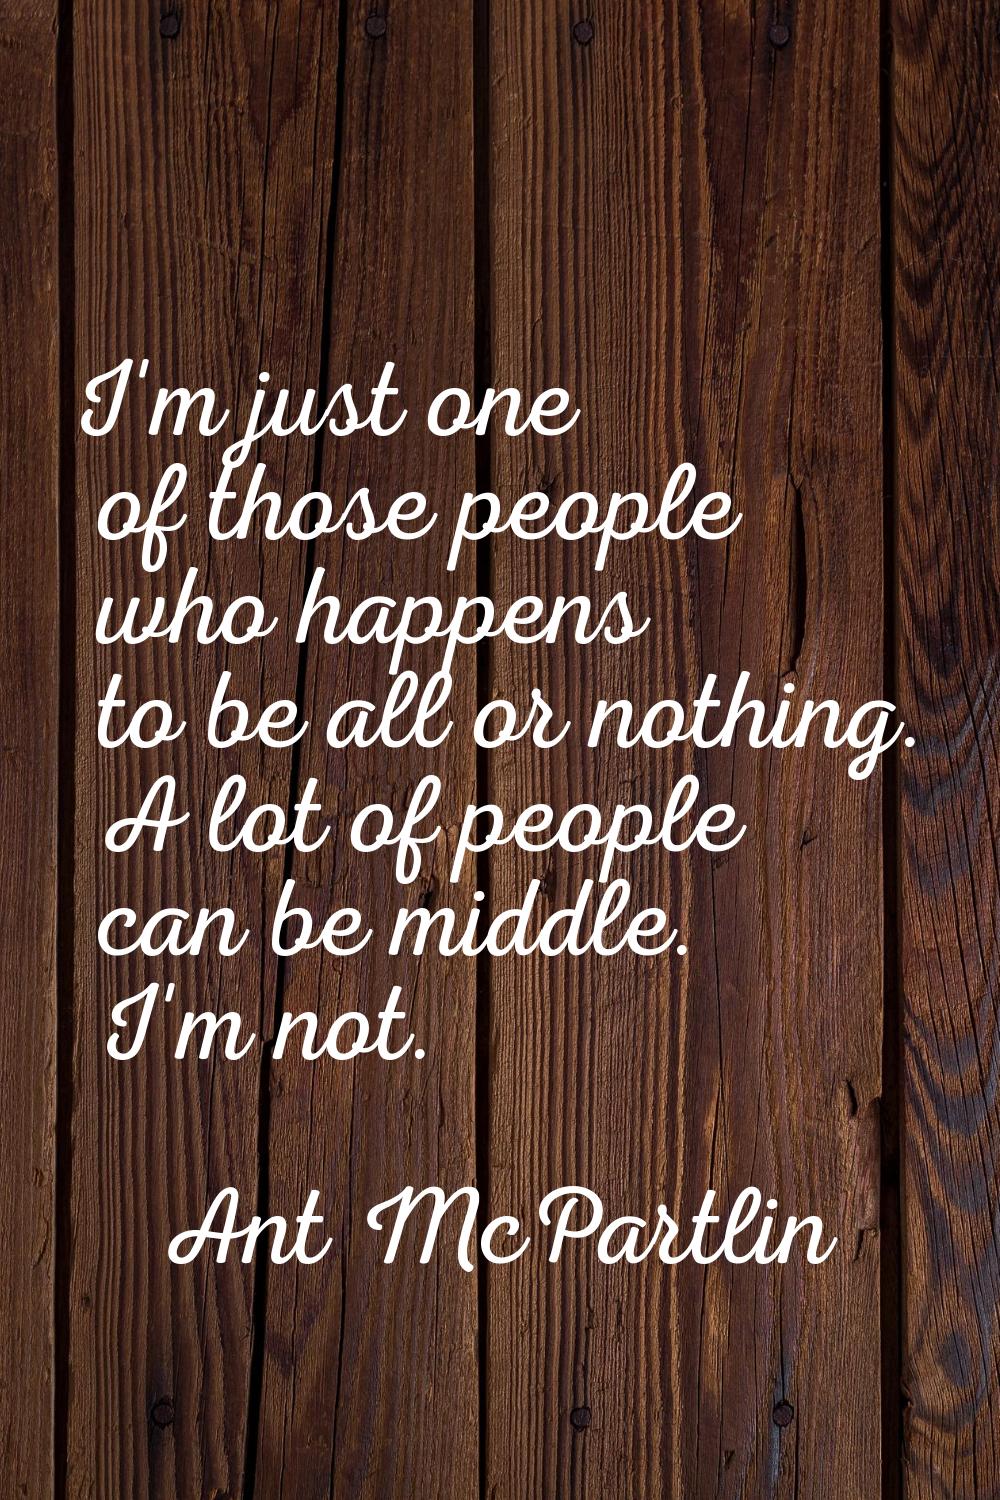 I'm just one of those people who happens to be all or nothing. A lot of people can be middle. I'm n